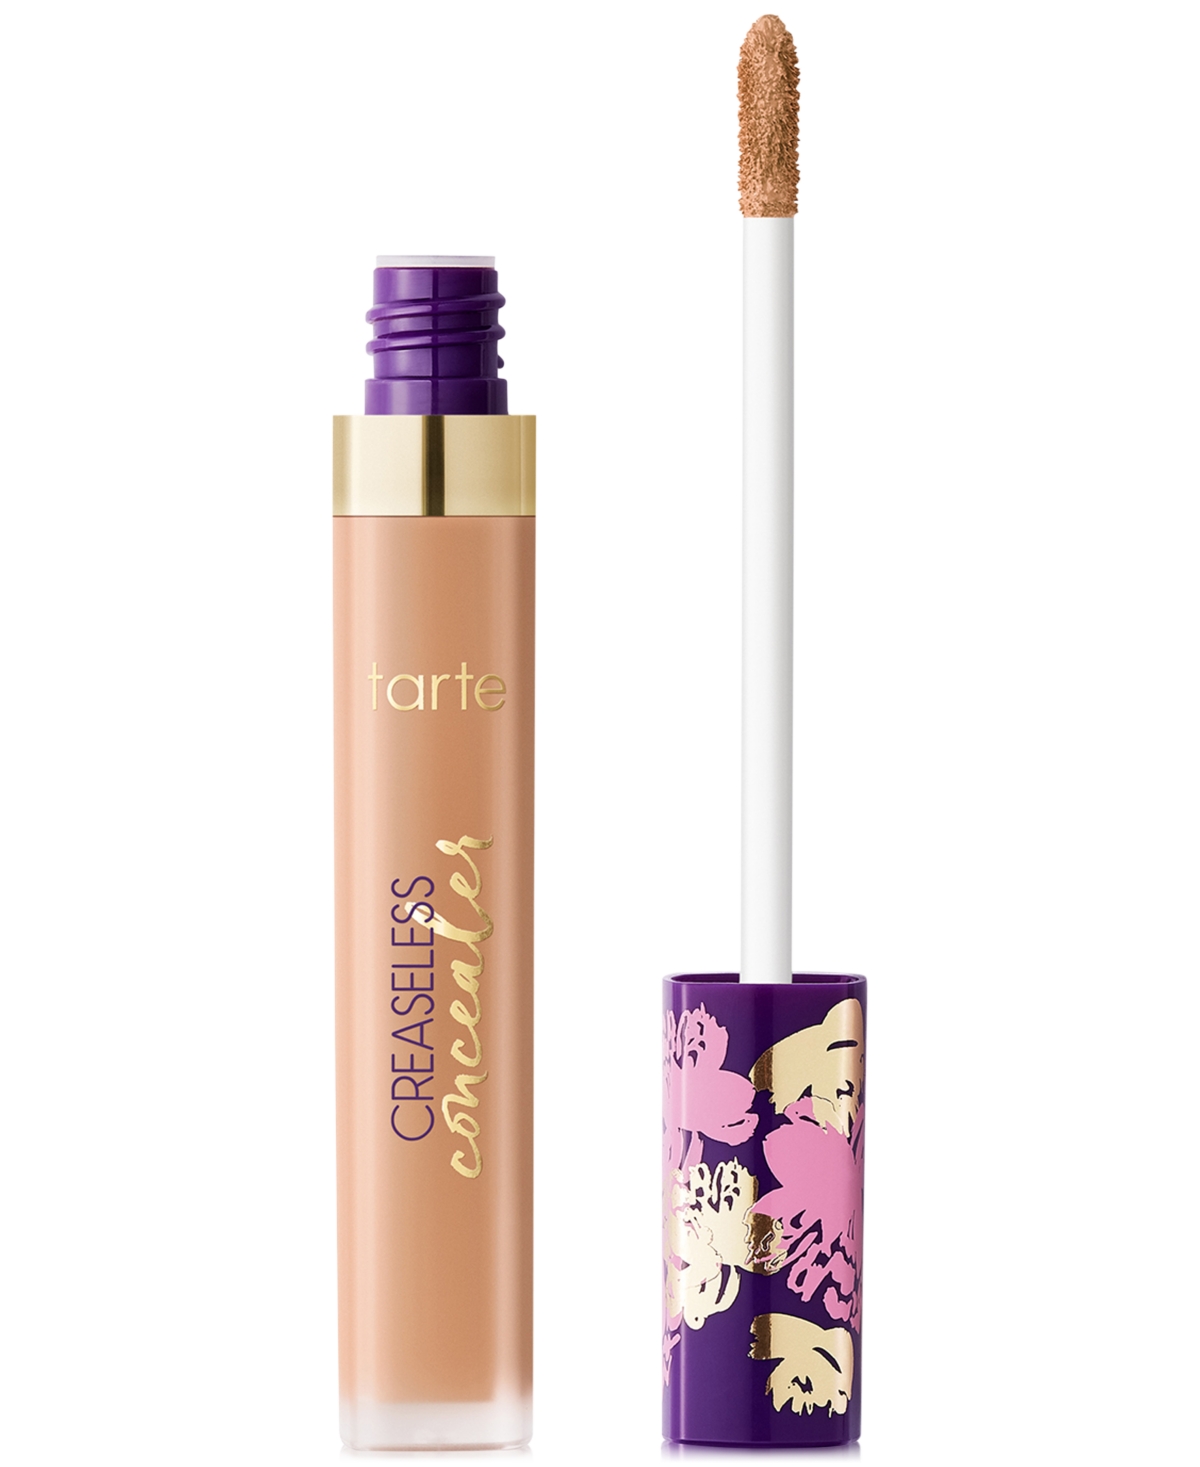 Tarte Creaseless Concealer In Stansand - Tan Skin With Warm,golden To